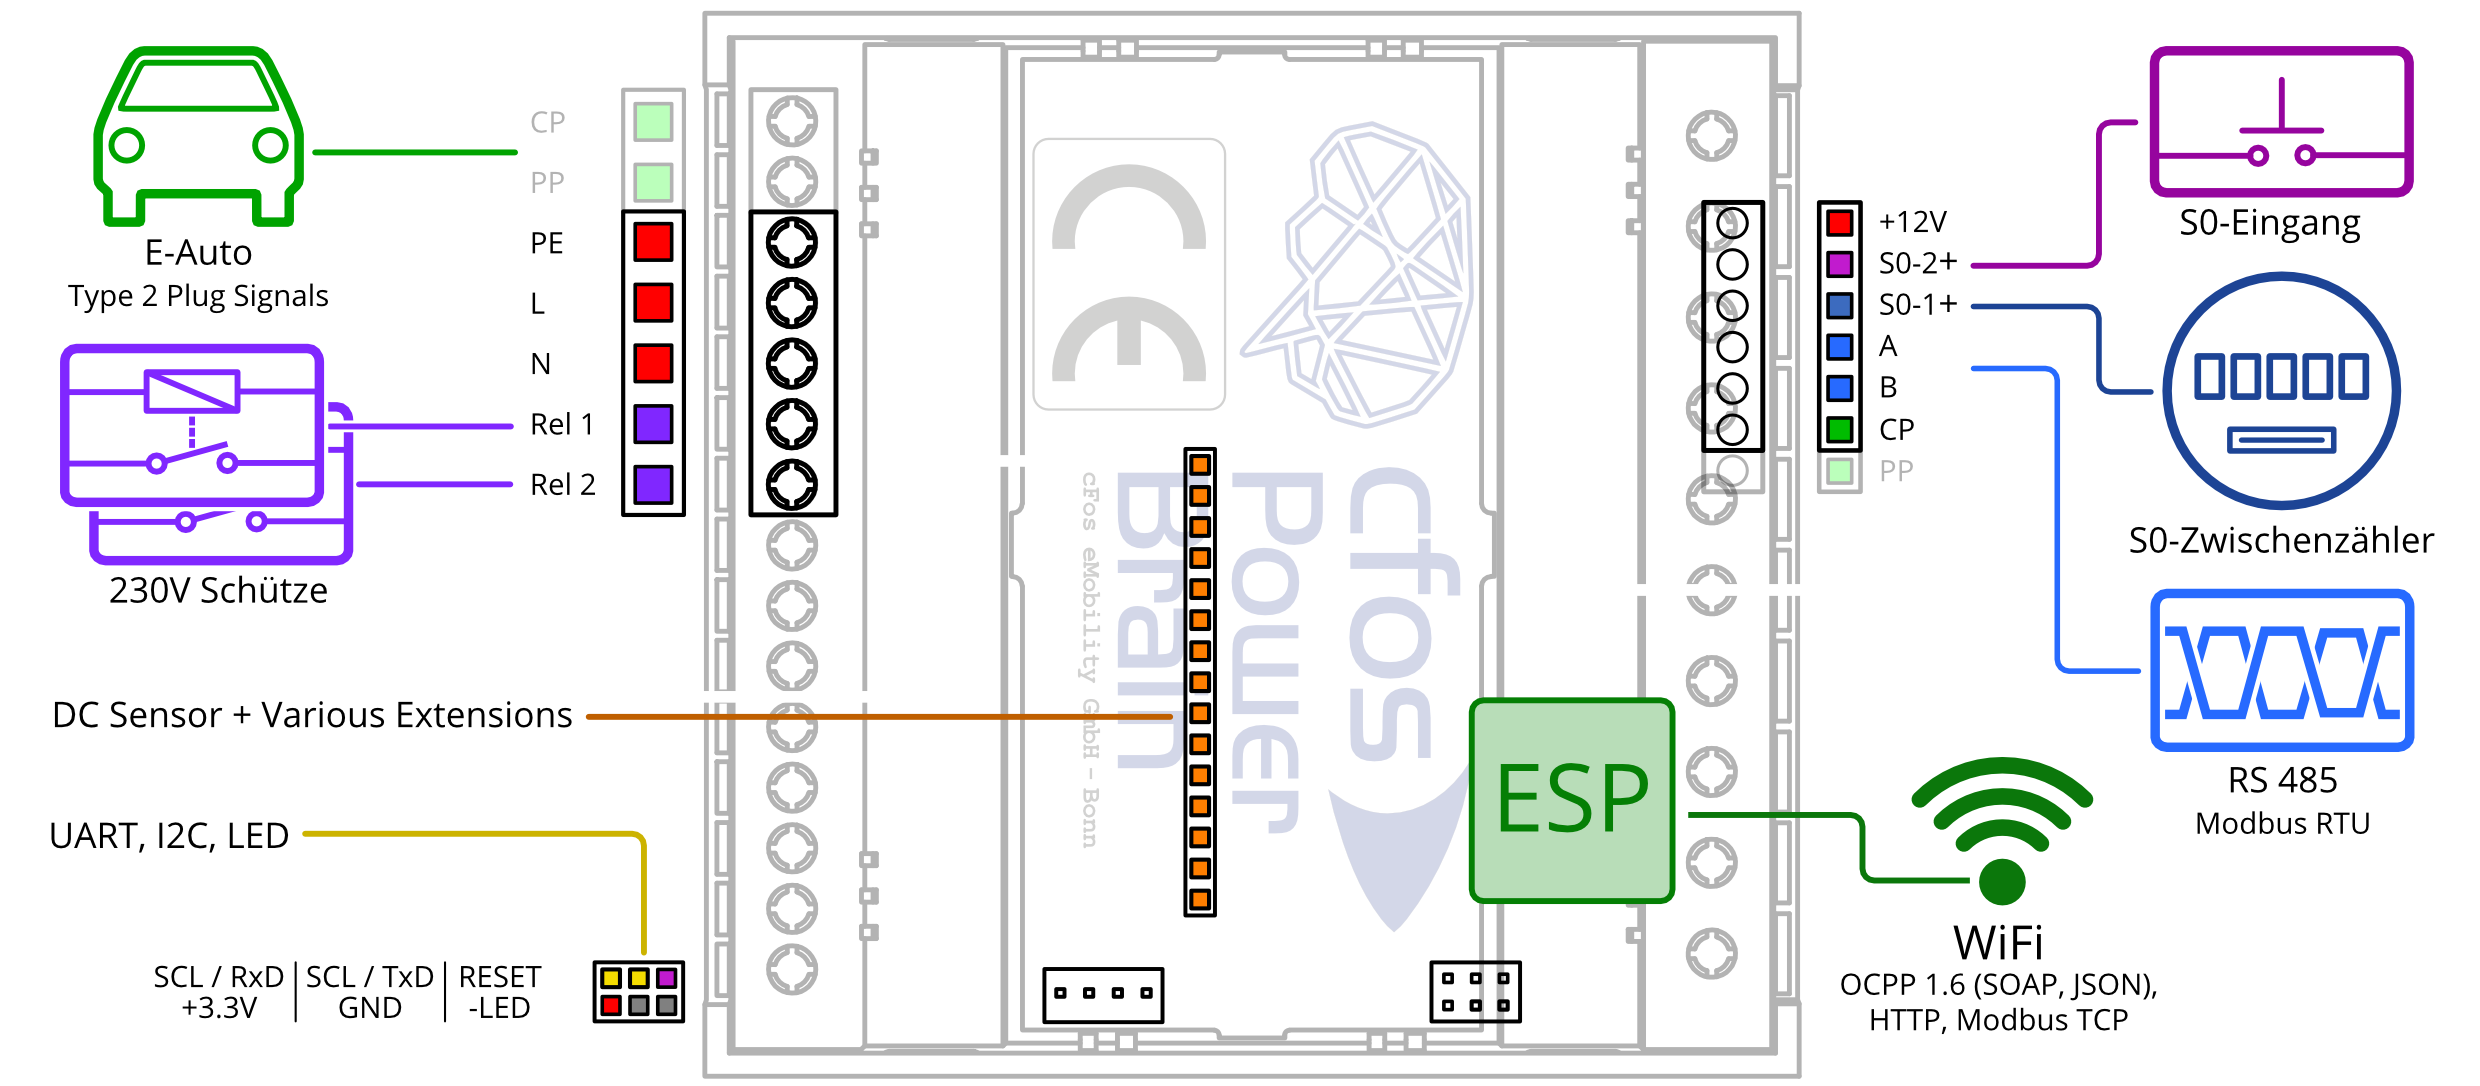 Schematics of the cFos Charging Controller input/output connectors